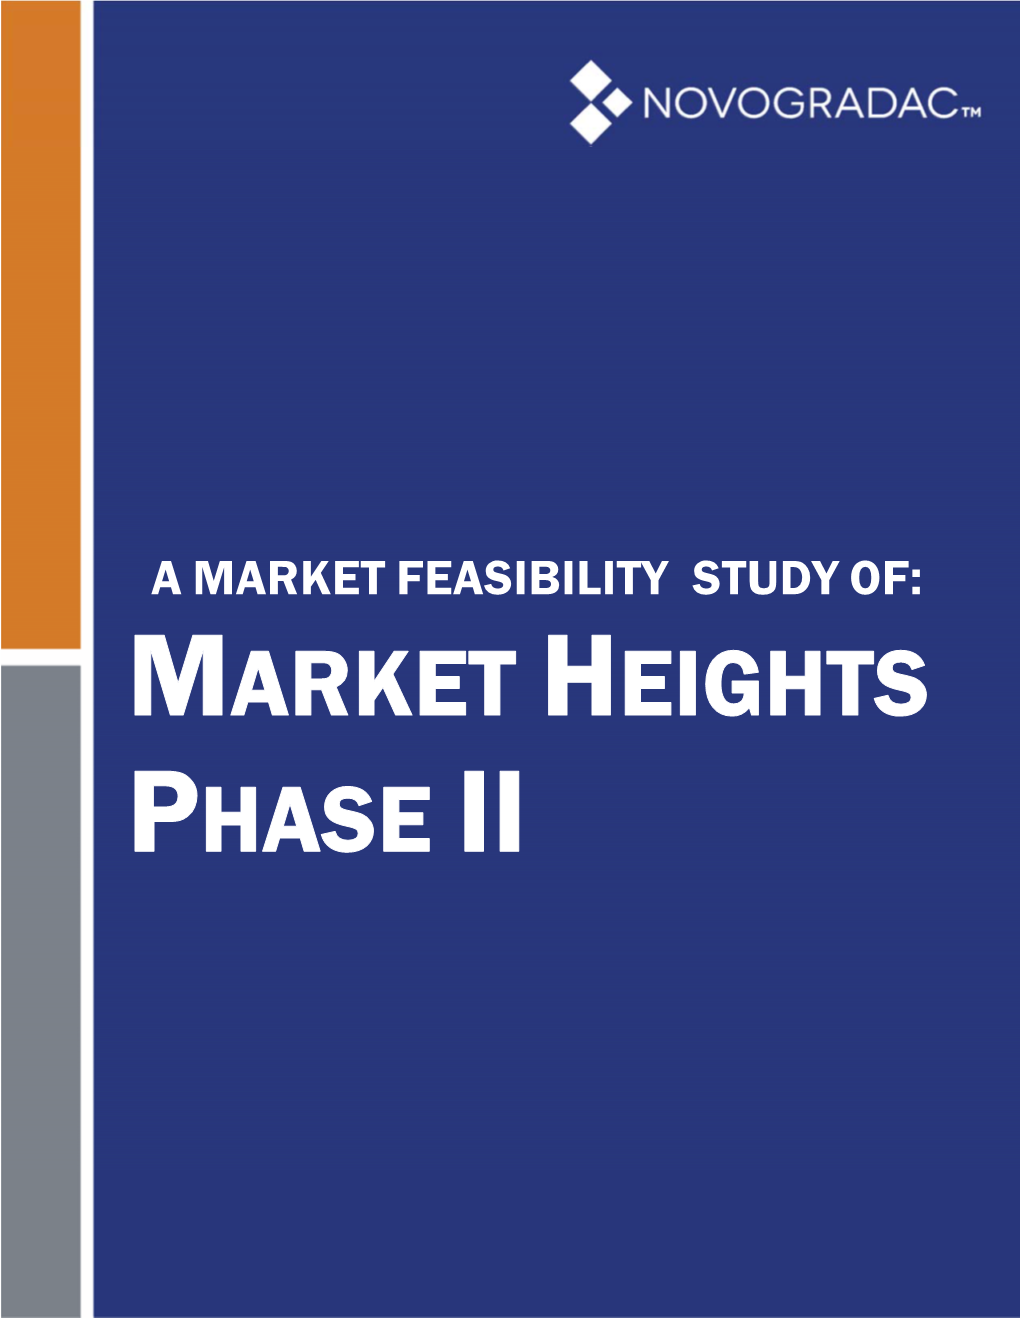 Market Heights Apartments Phase II (Subject), a Proposed New Construction Development